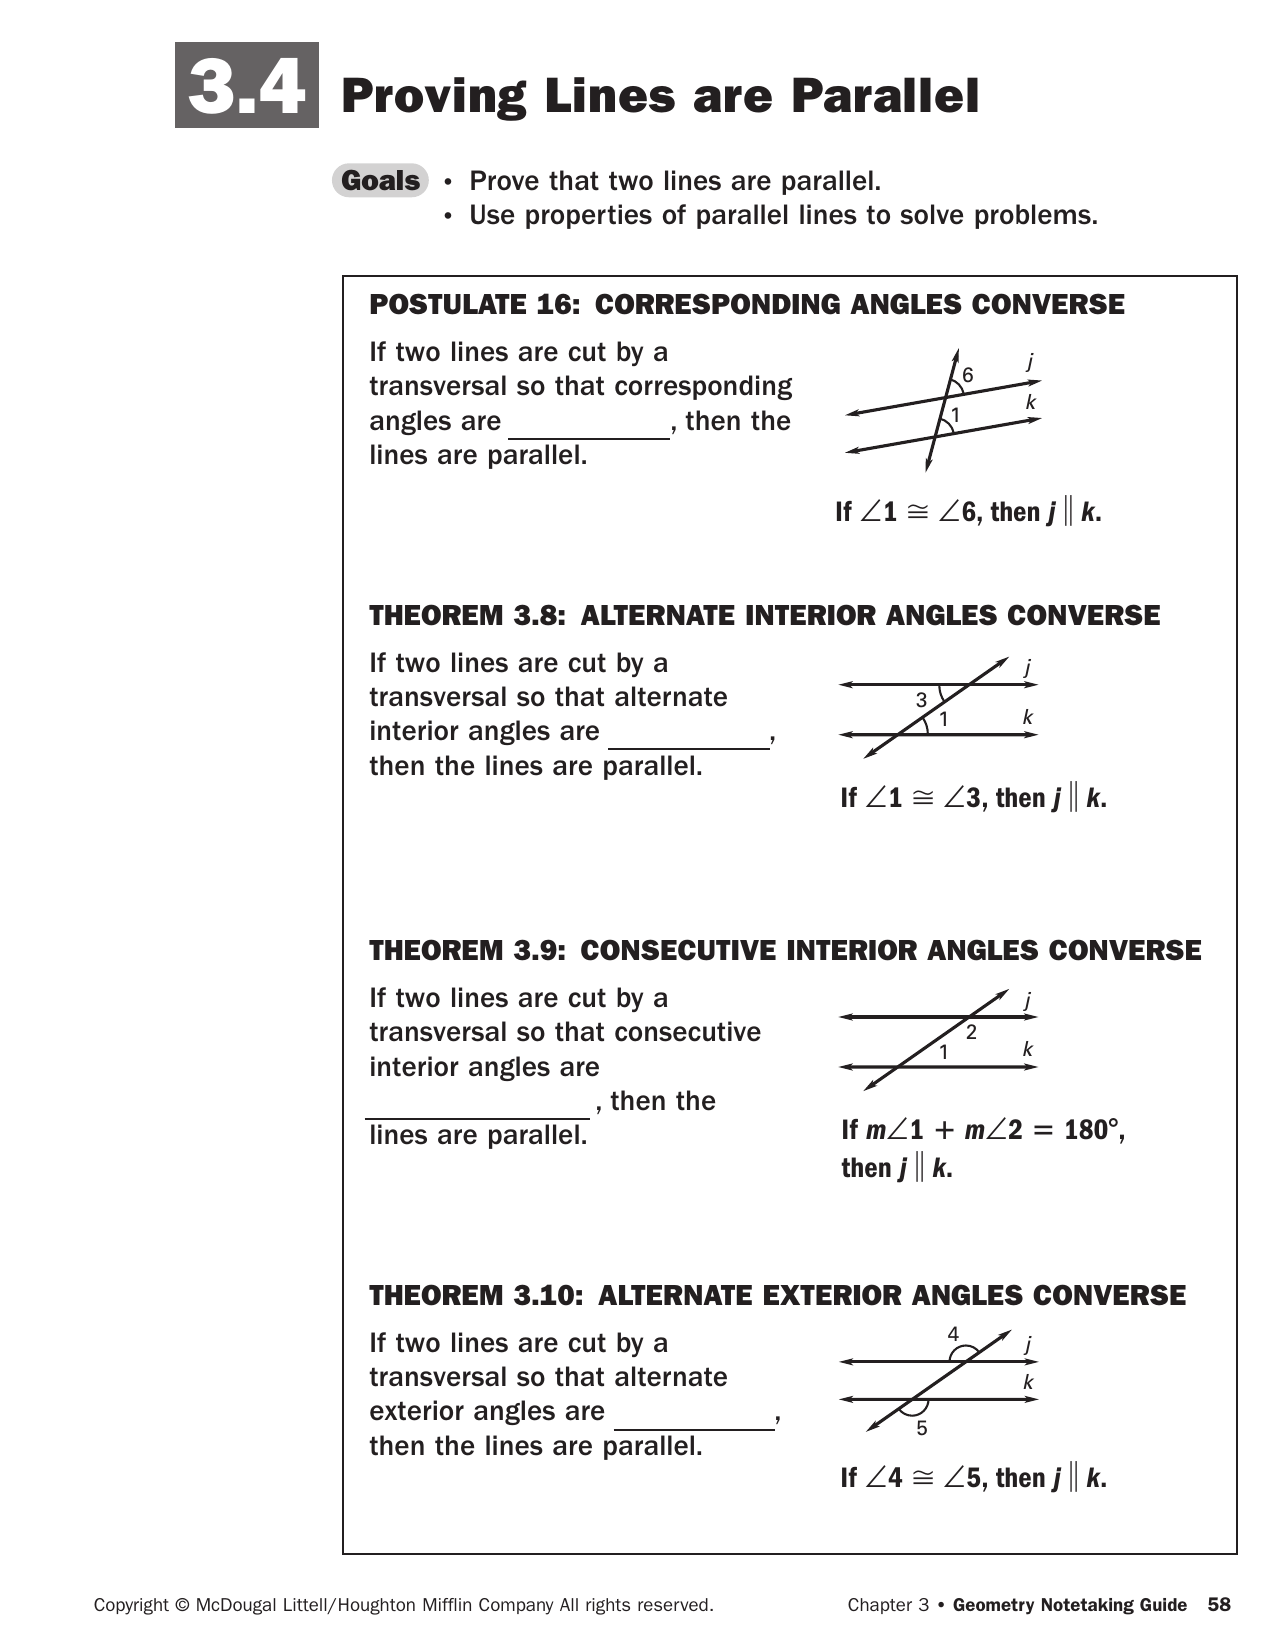 Parallel Lines Proofs Worksheet Answers